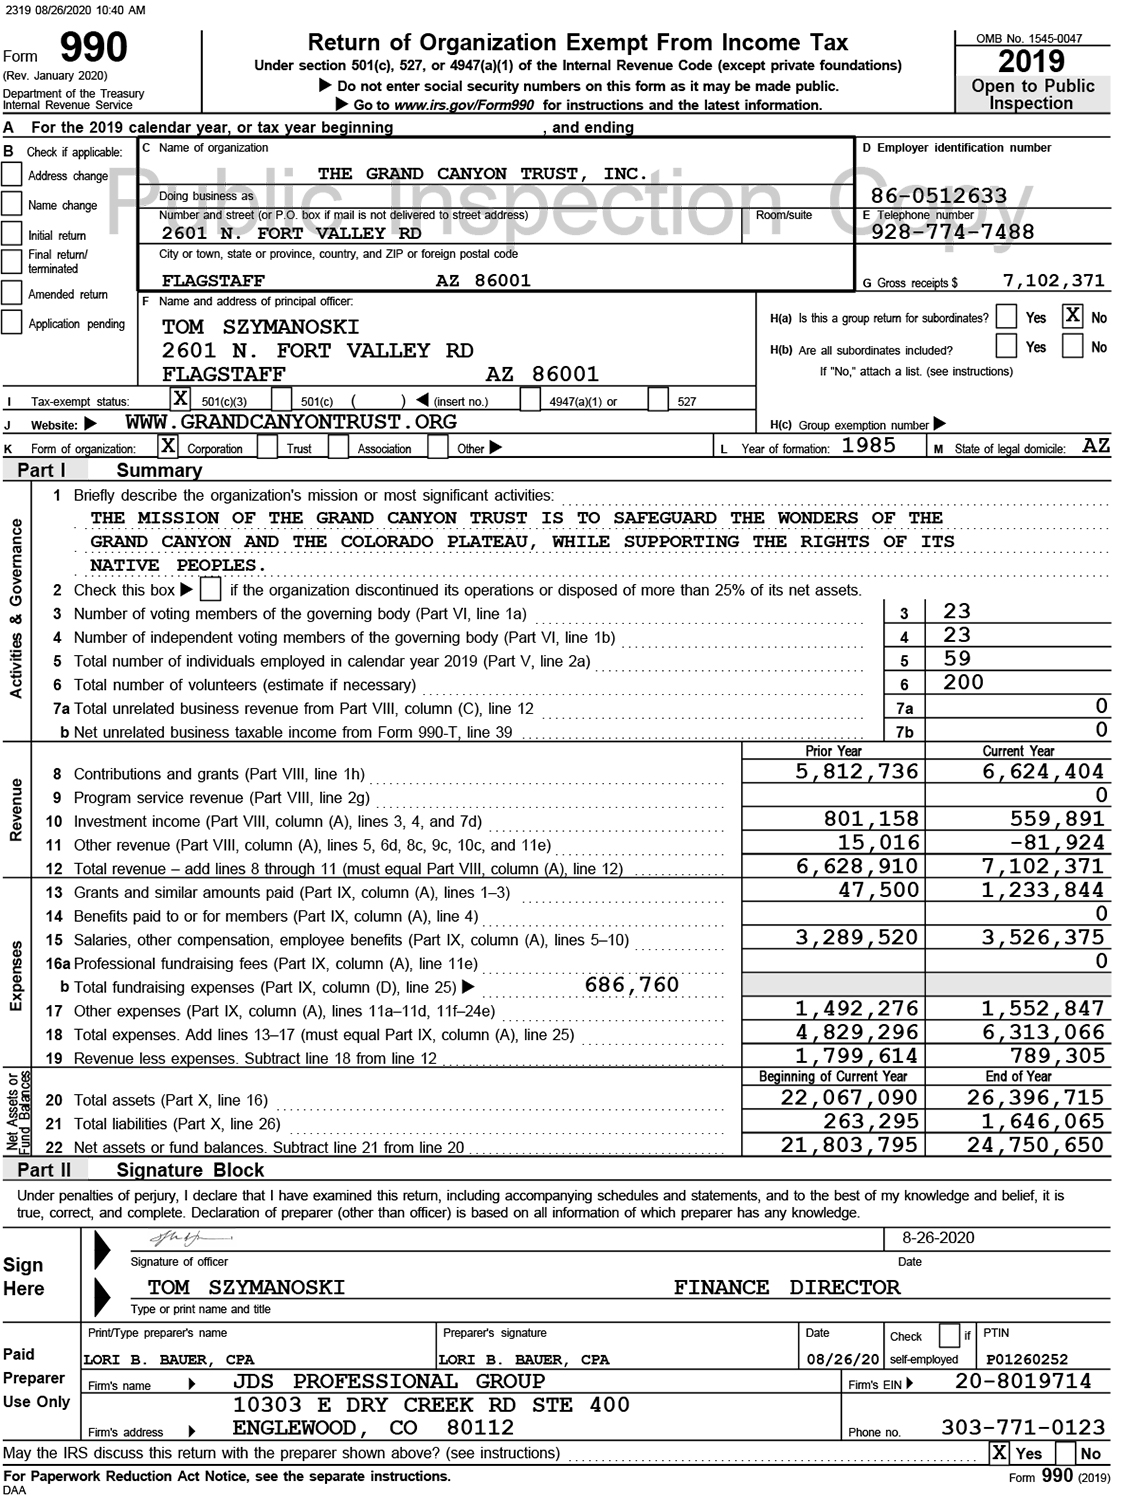 View the Trust's 990 tax form